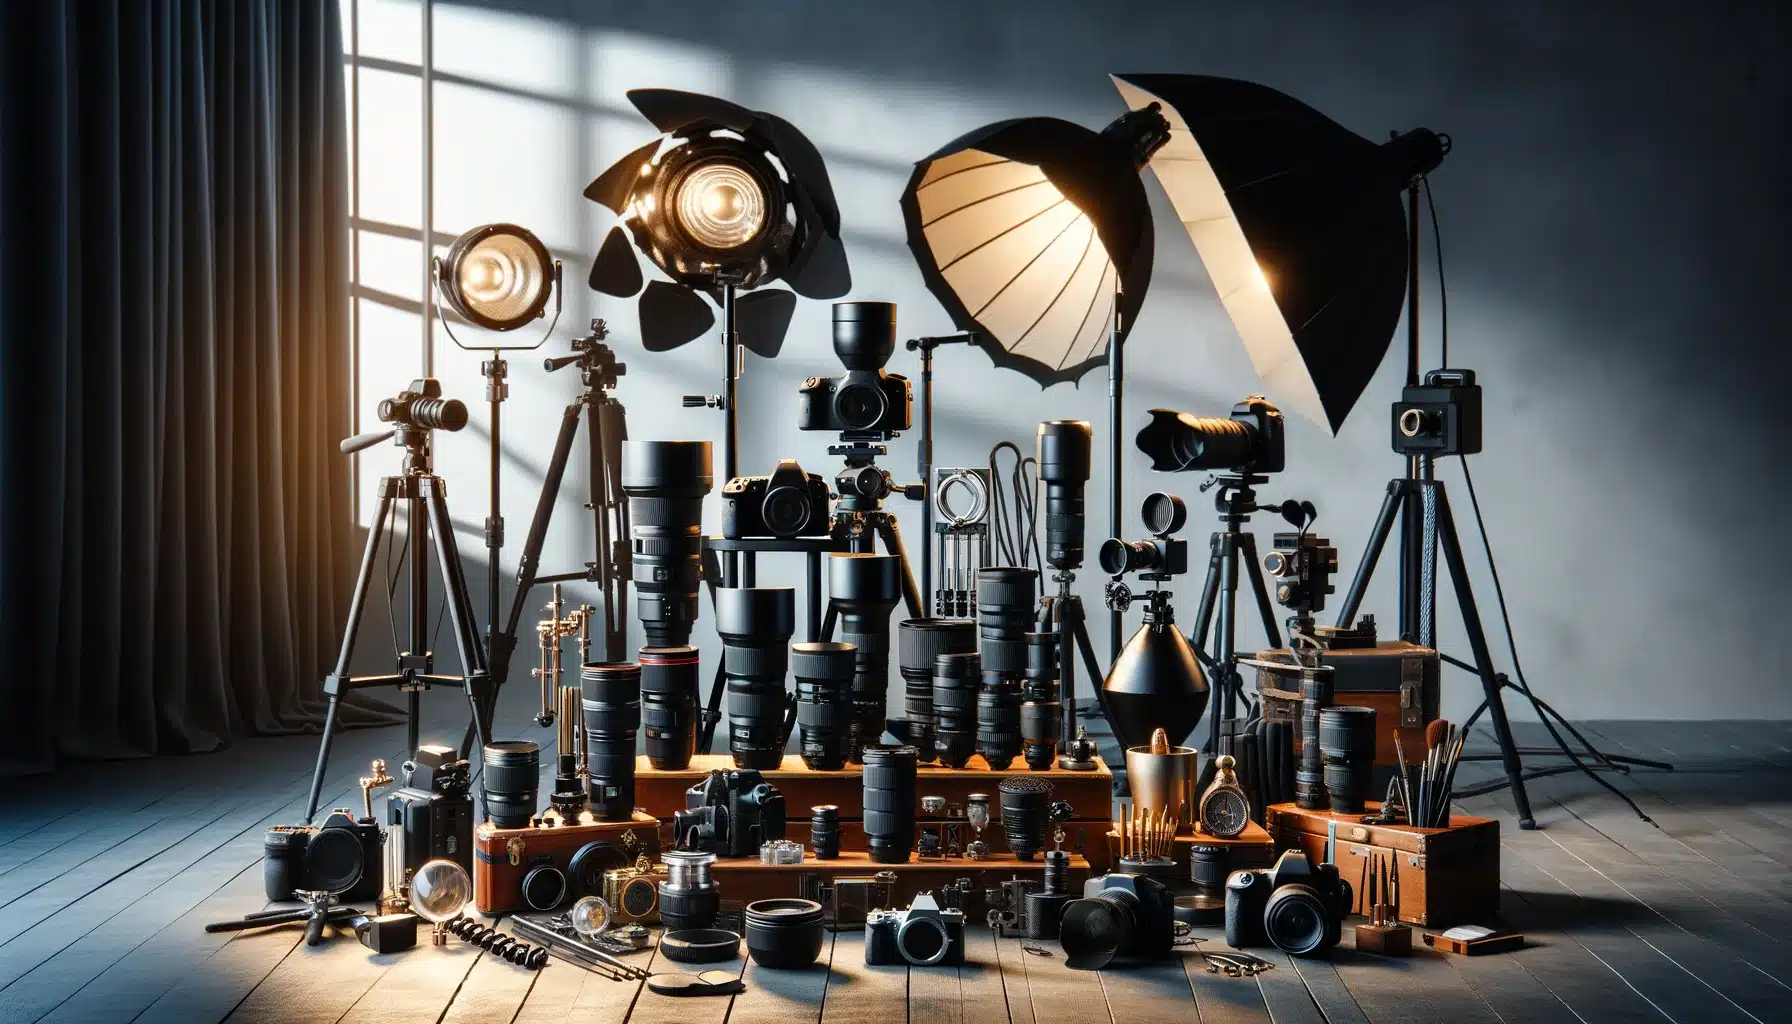 A collection of fine art photography equipment, including high-quality cameras, lenses, tripods, lighting setups, and artistic props, arranged on a table in a studio setting.